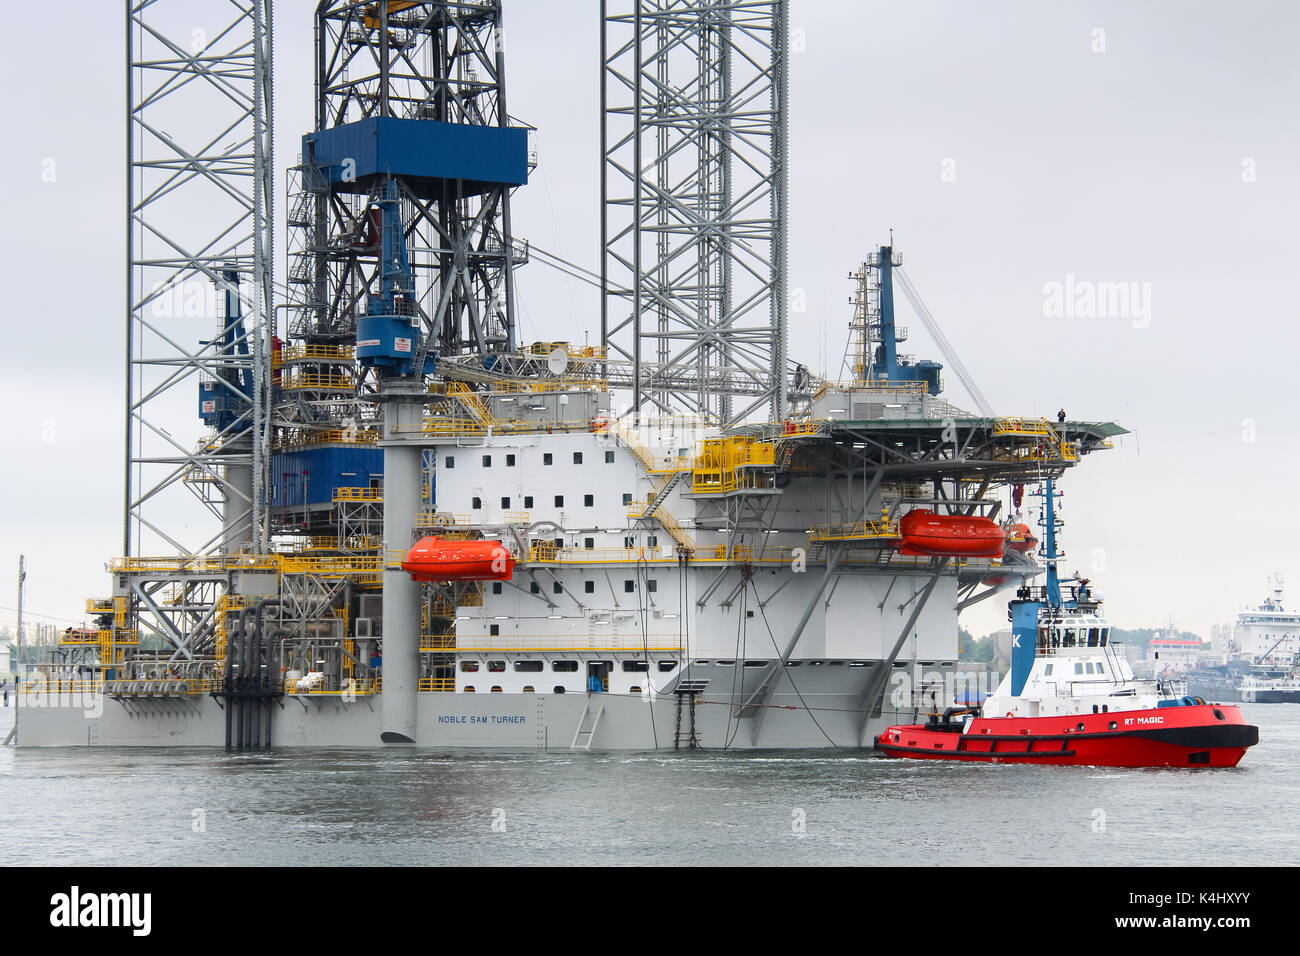 Caland Canal, Rotterdam, the Netherlands, May 29, 2014: The jack-up rig Noble Sam Turner is being towed by a Kotug tugboat Stock Photo